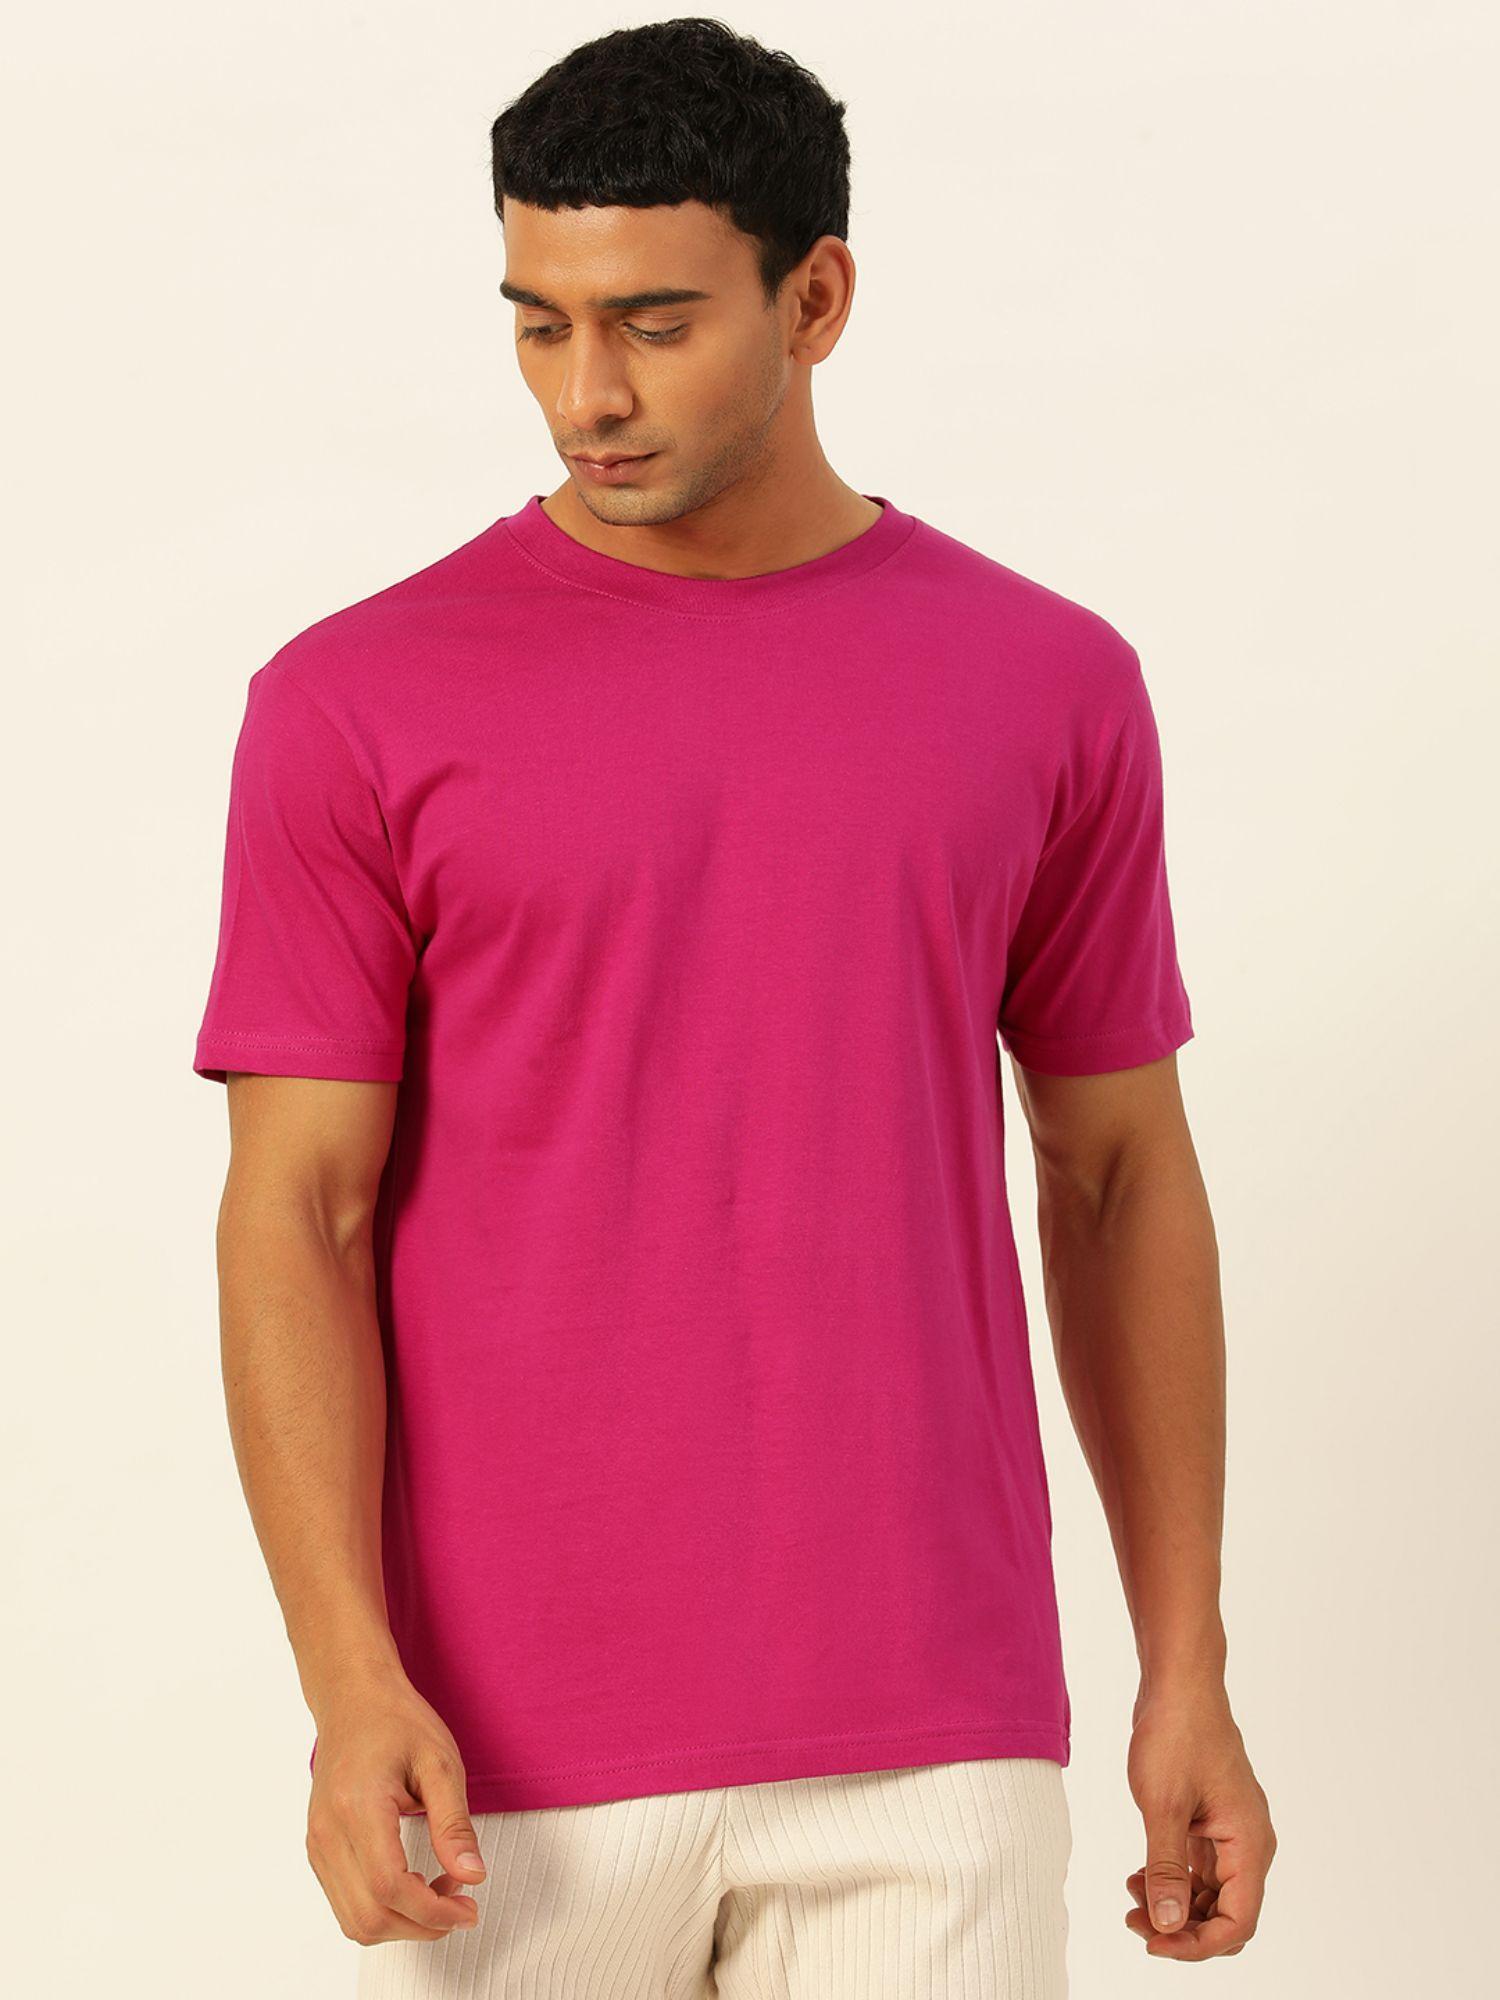 solid pink round neck cotton relaxed fit t shirt